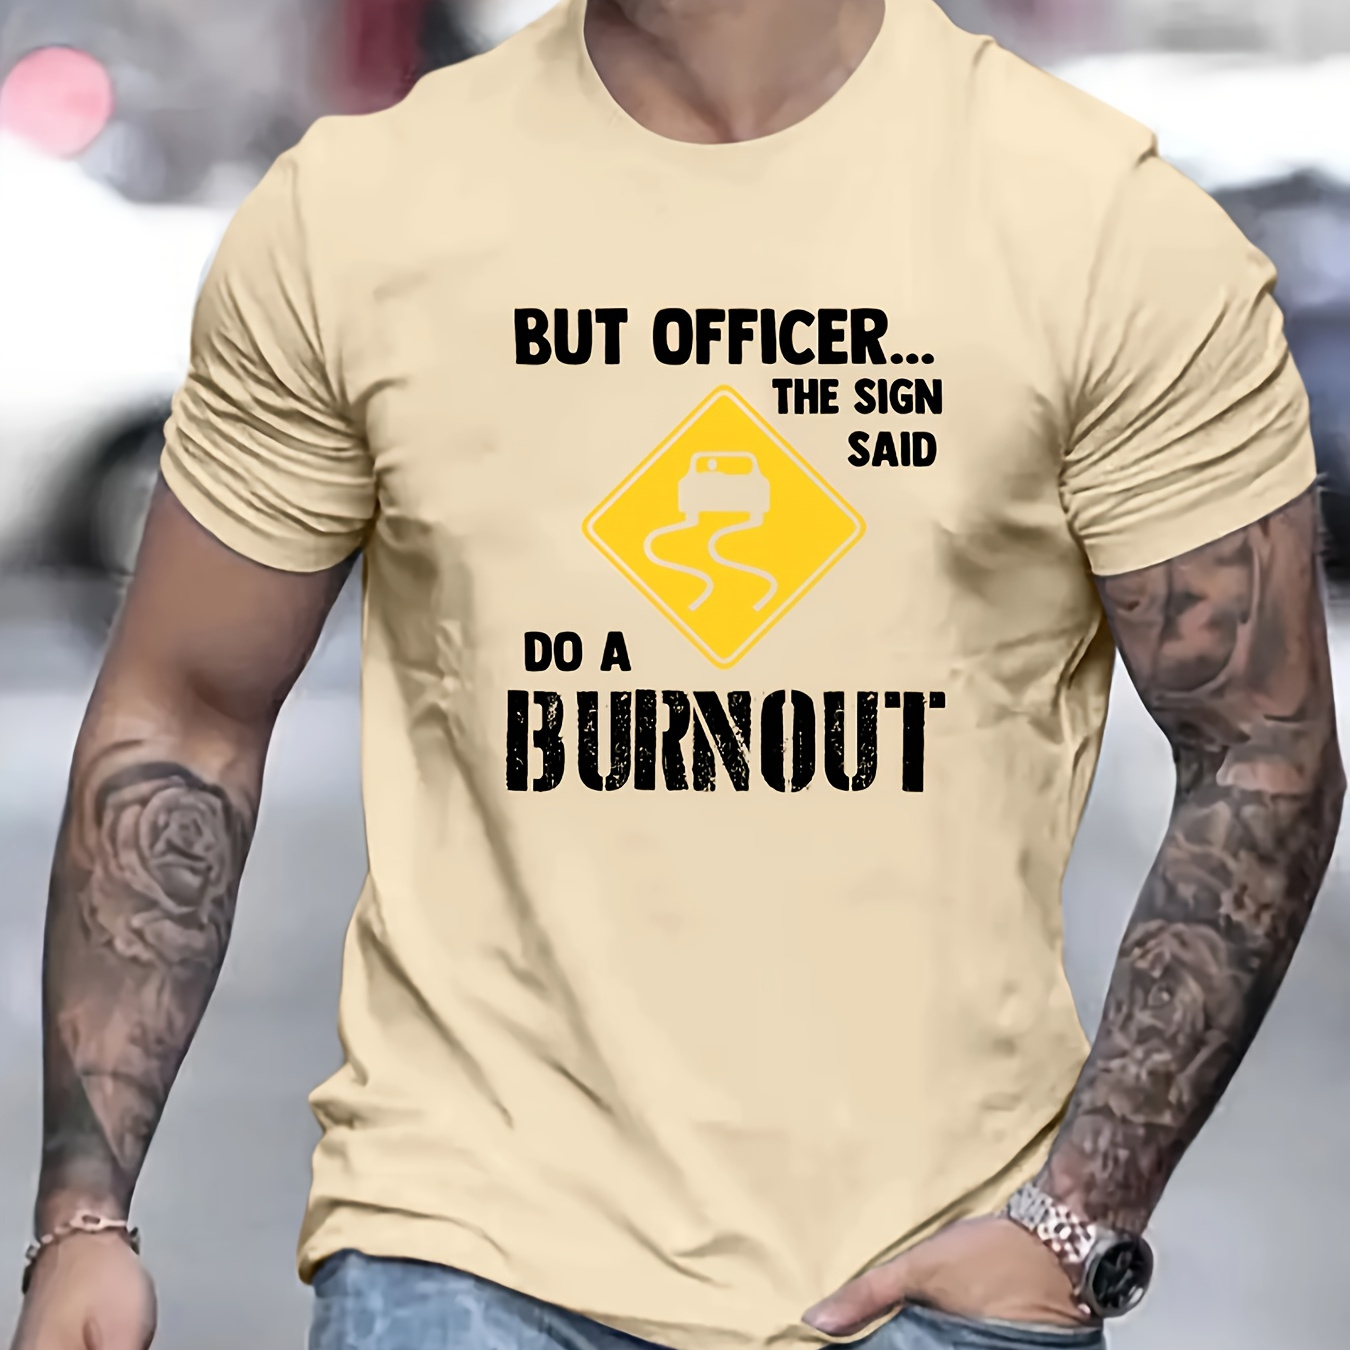 

But Officer The Sign Said Print T Shirt, Tees For Men, Casual Short Sleeve T-shirt For Summer